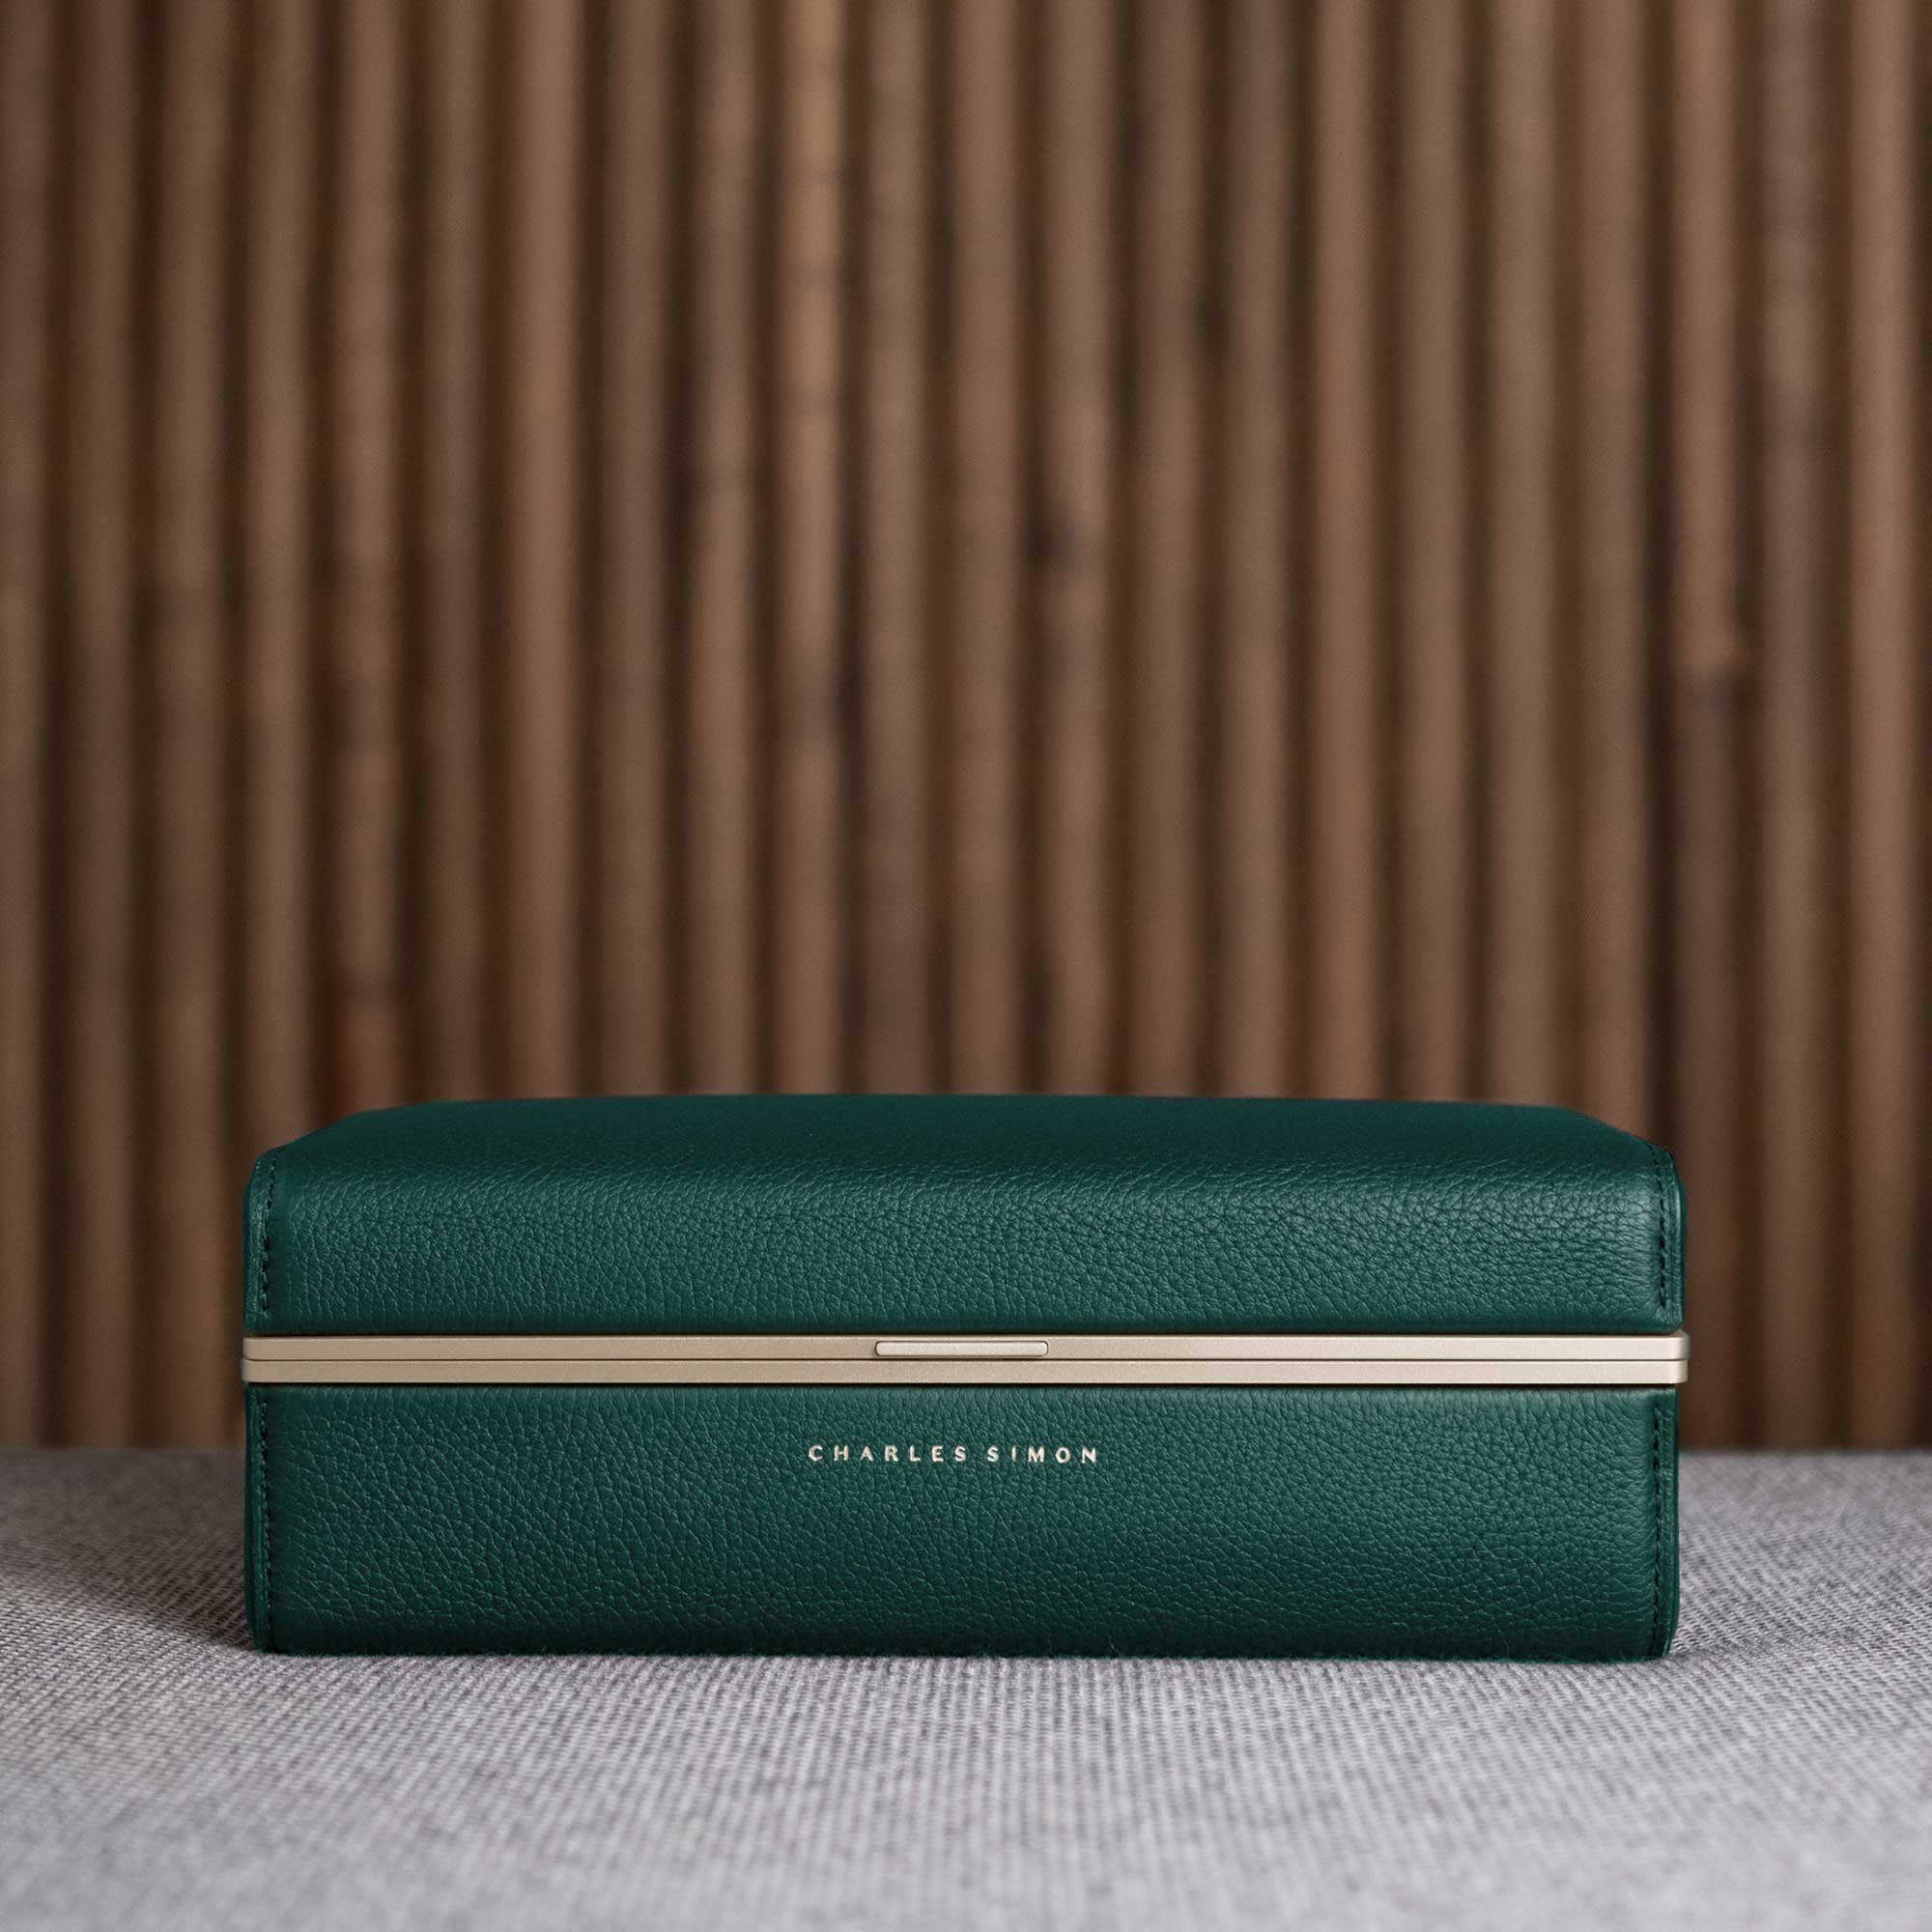 Closed Eaton 3 Watch case in emerald leather featuring golden accents. Handmade in Canada.